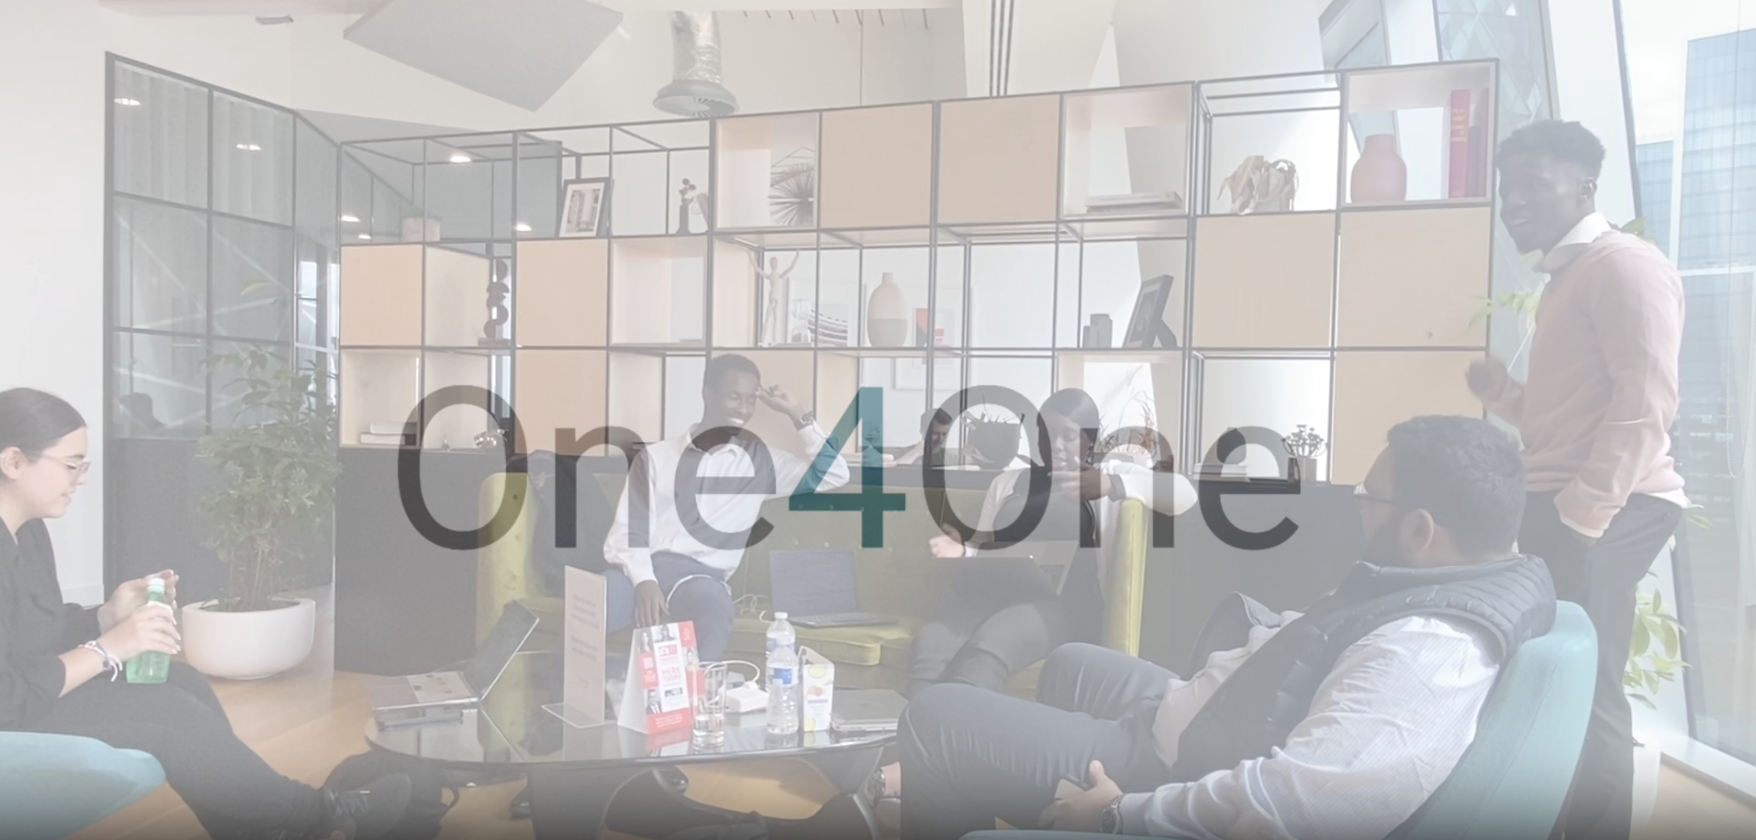 One4One – our social impact programme